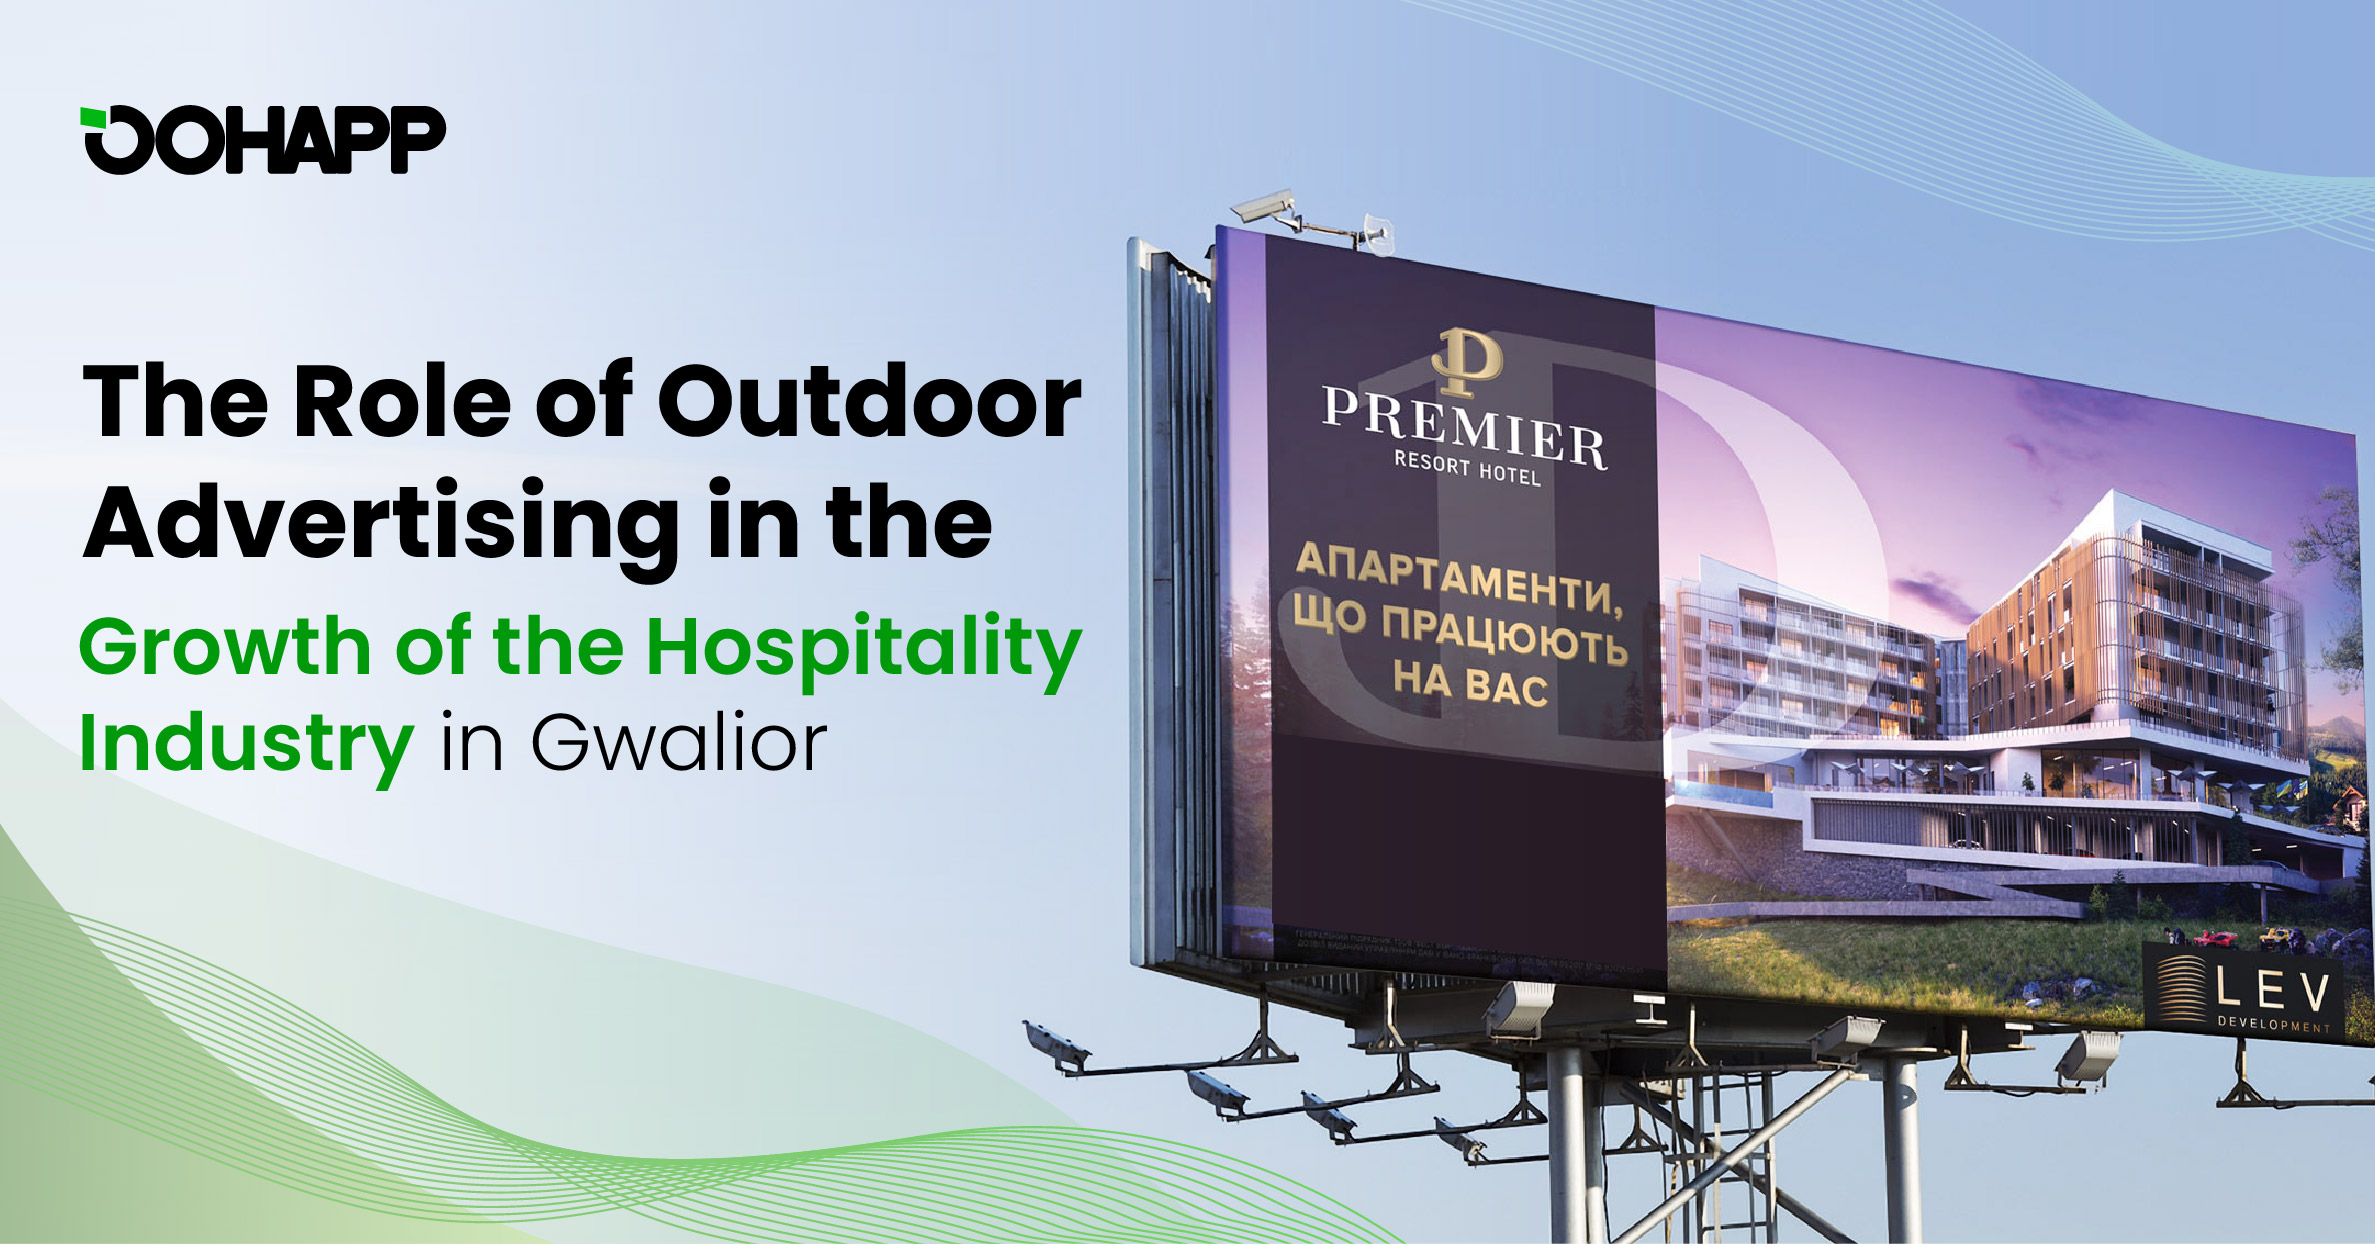 The Role of Outdoor Advertising in the Growth of the Hospitality Industry in Gwalior